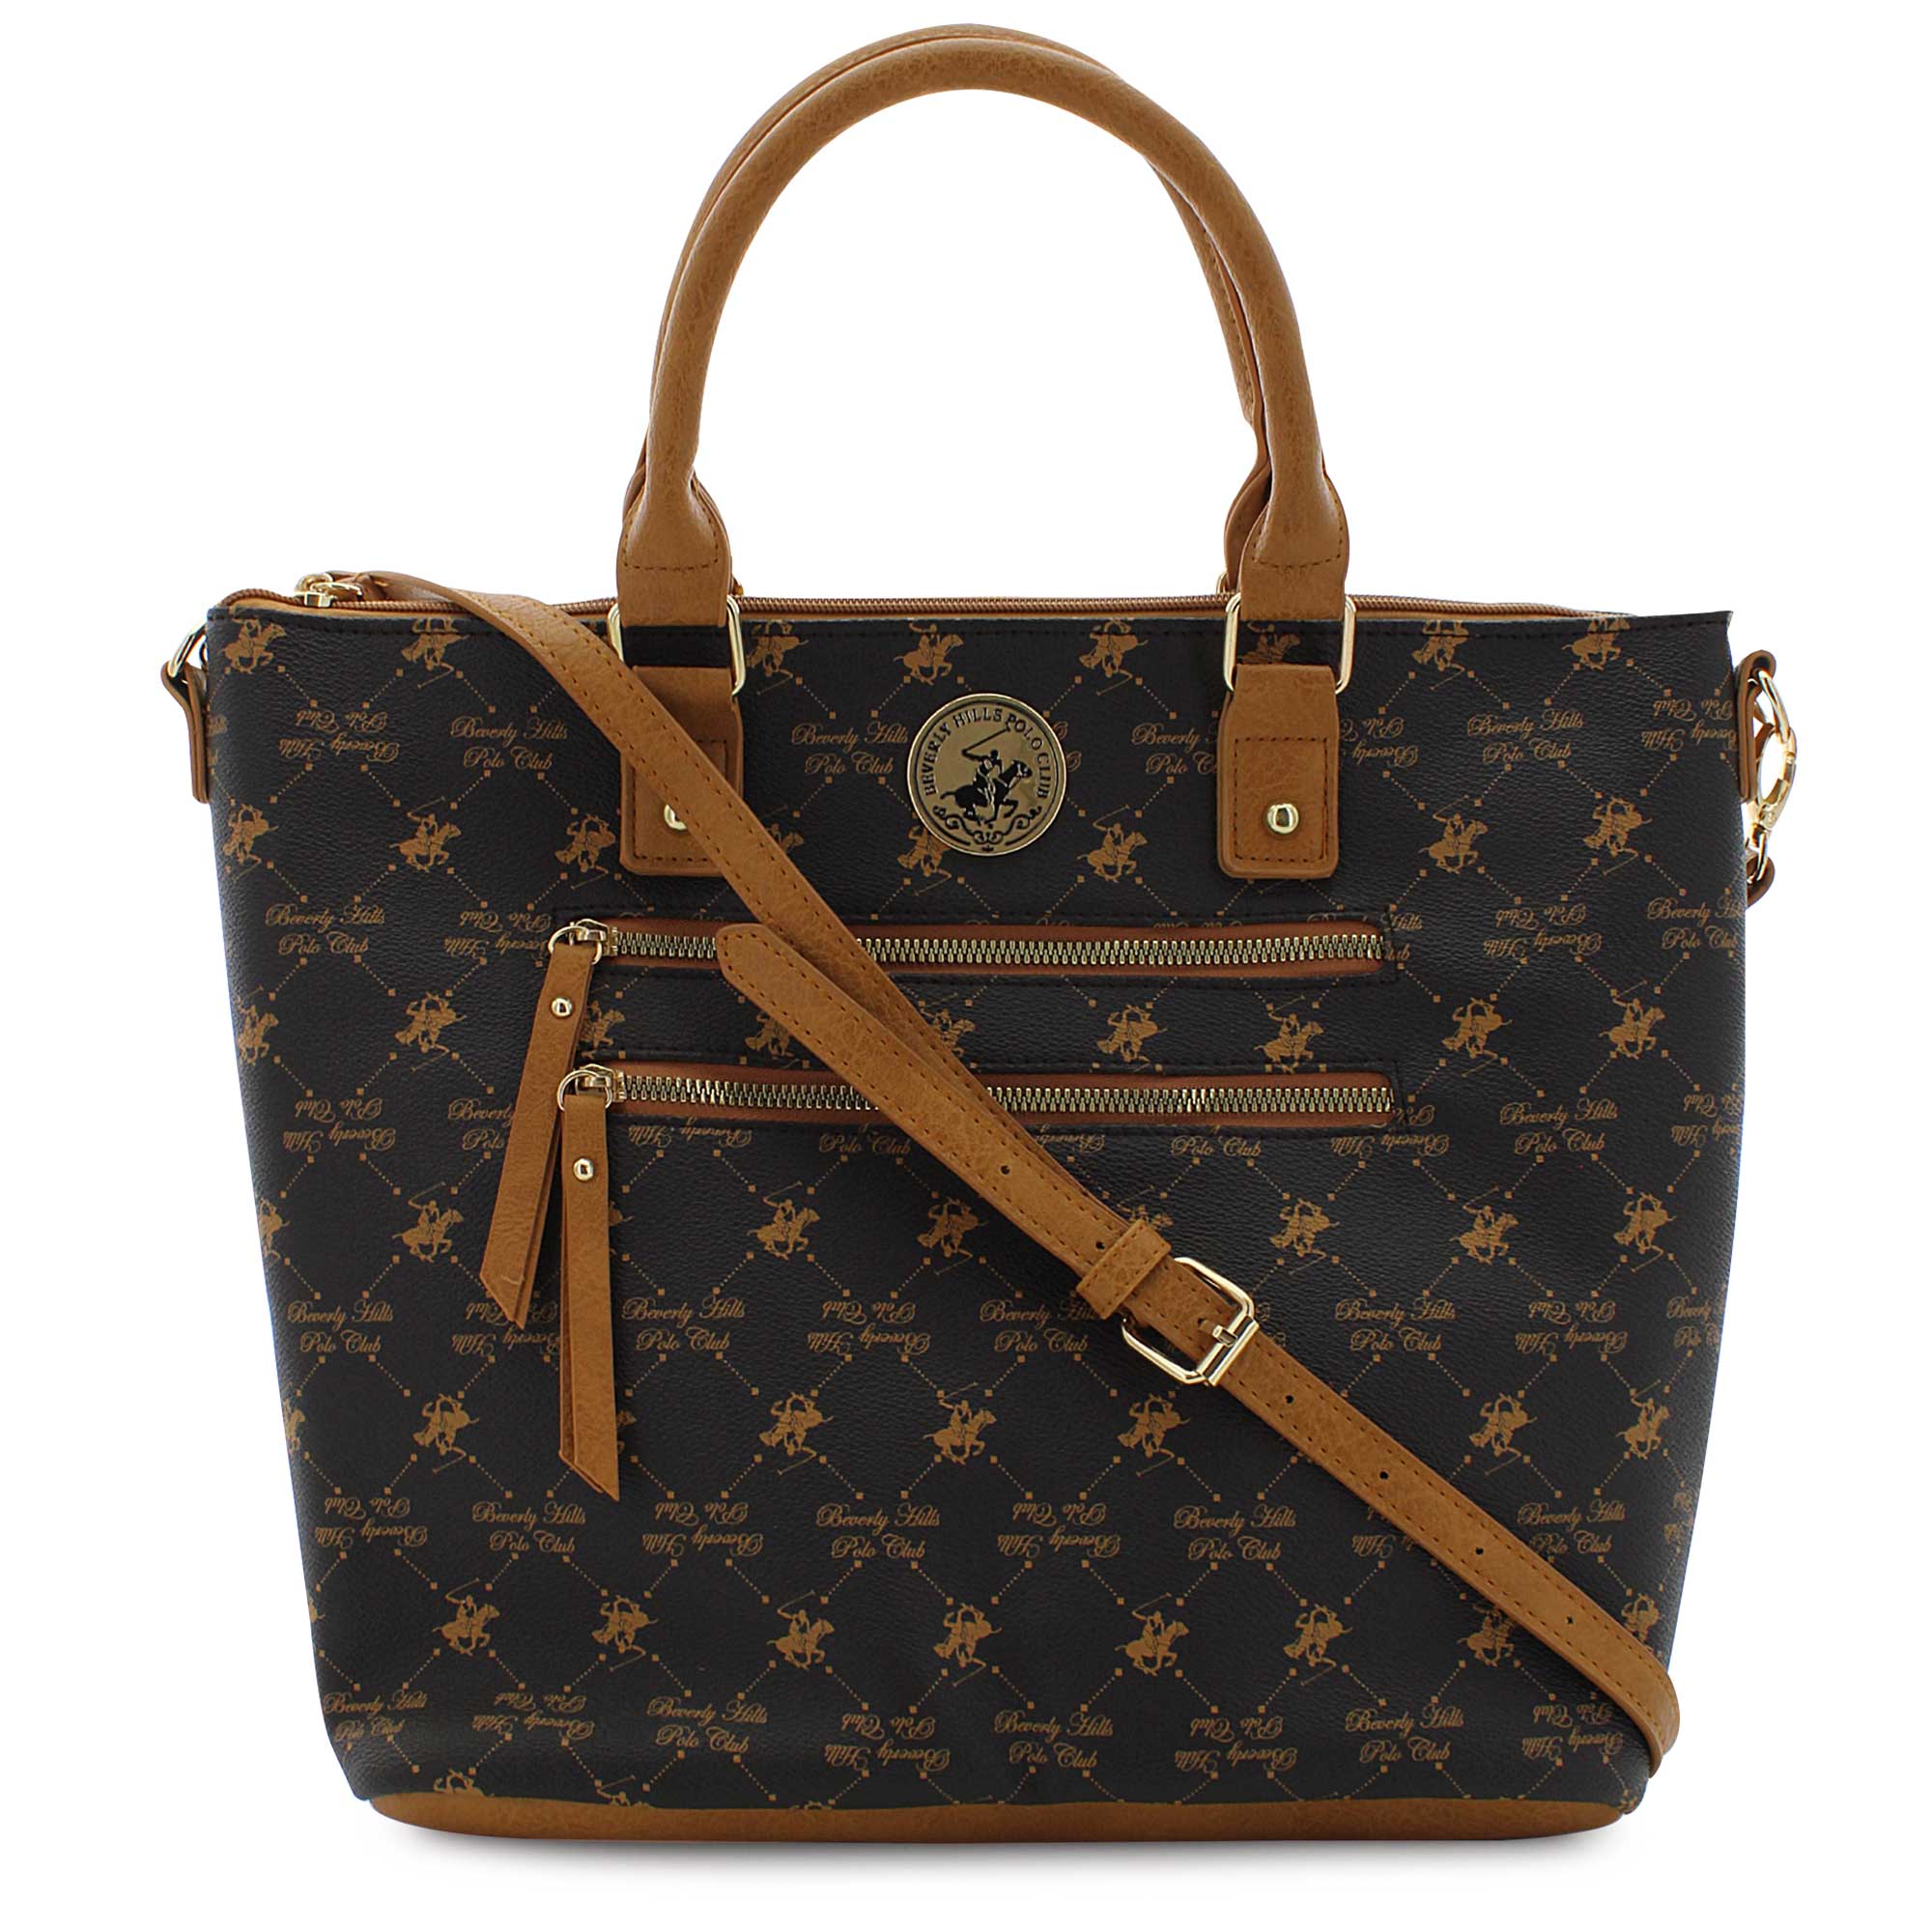 Beverly Hills Polo Club Signature Tote